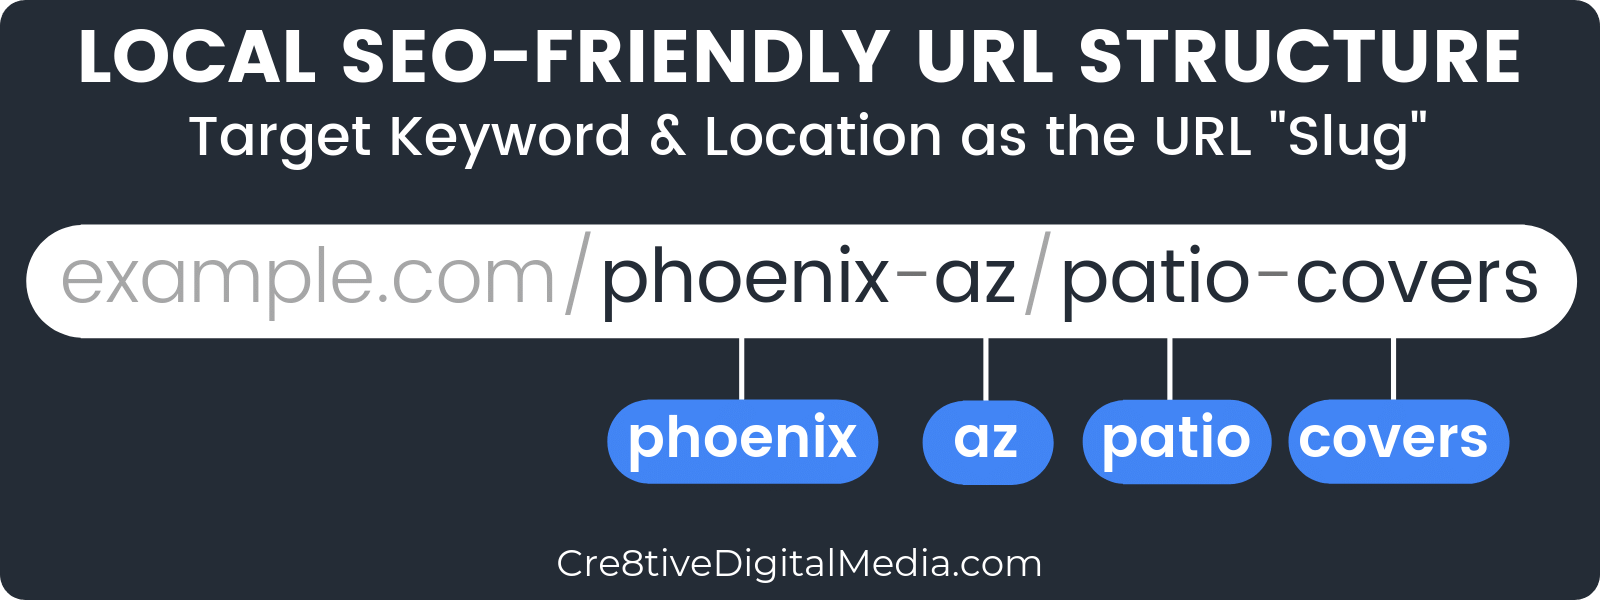 Local SEO-Friendly URL structure for Patio Covers in Phoenix, Arizona